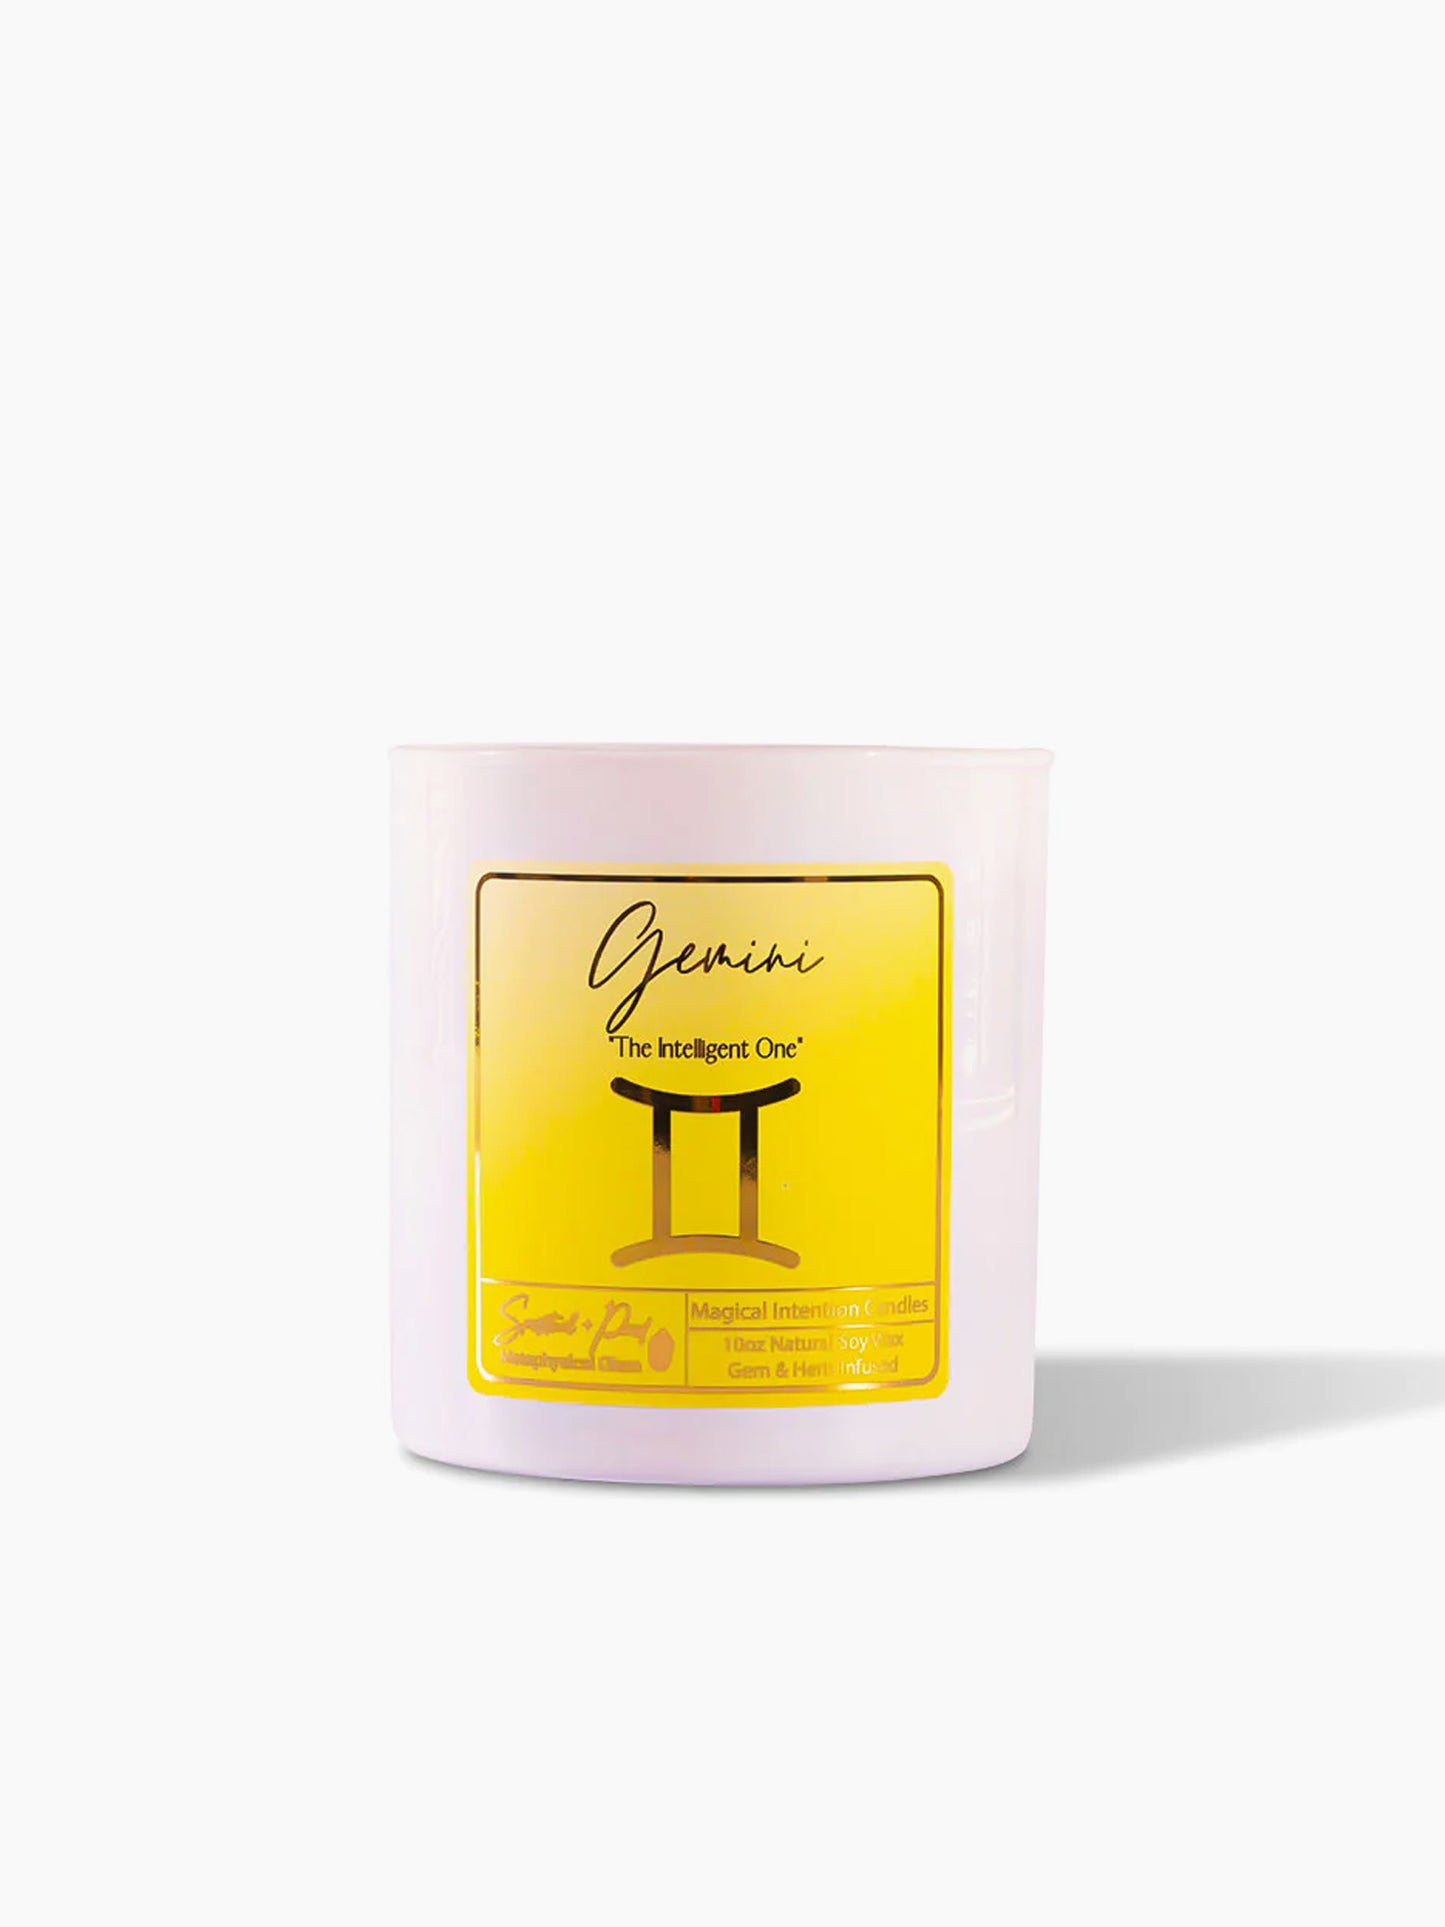 Zodiac Collection: Gemini Energy Candle ~ The Intelligent One